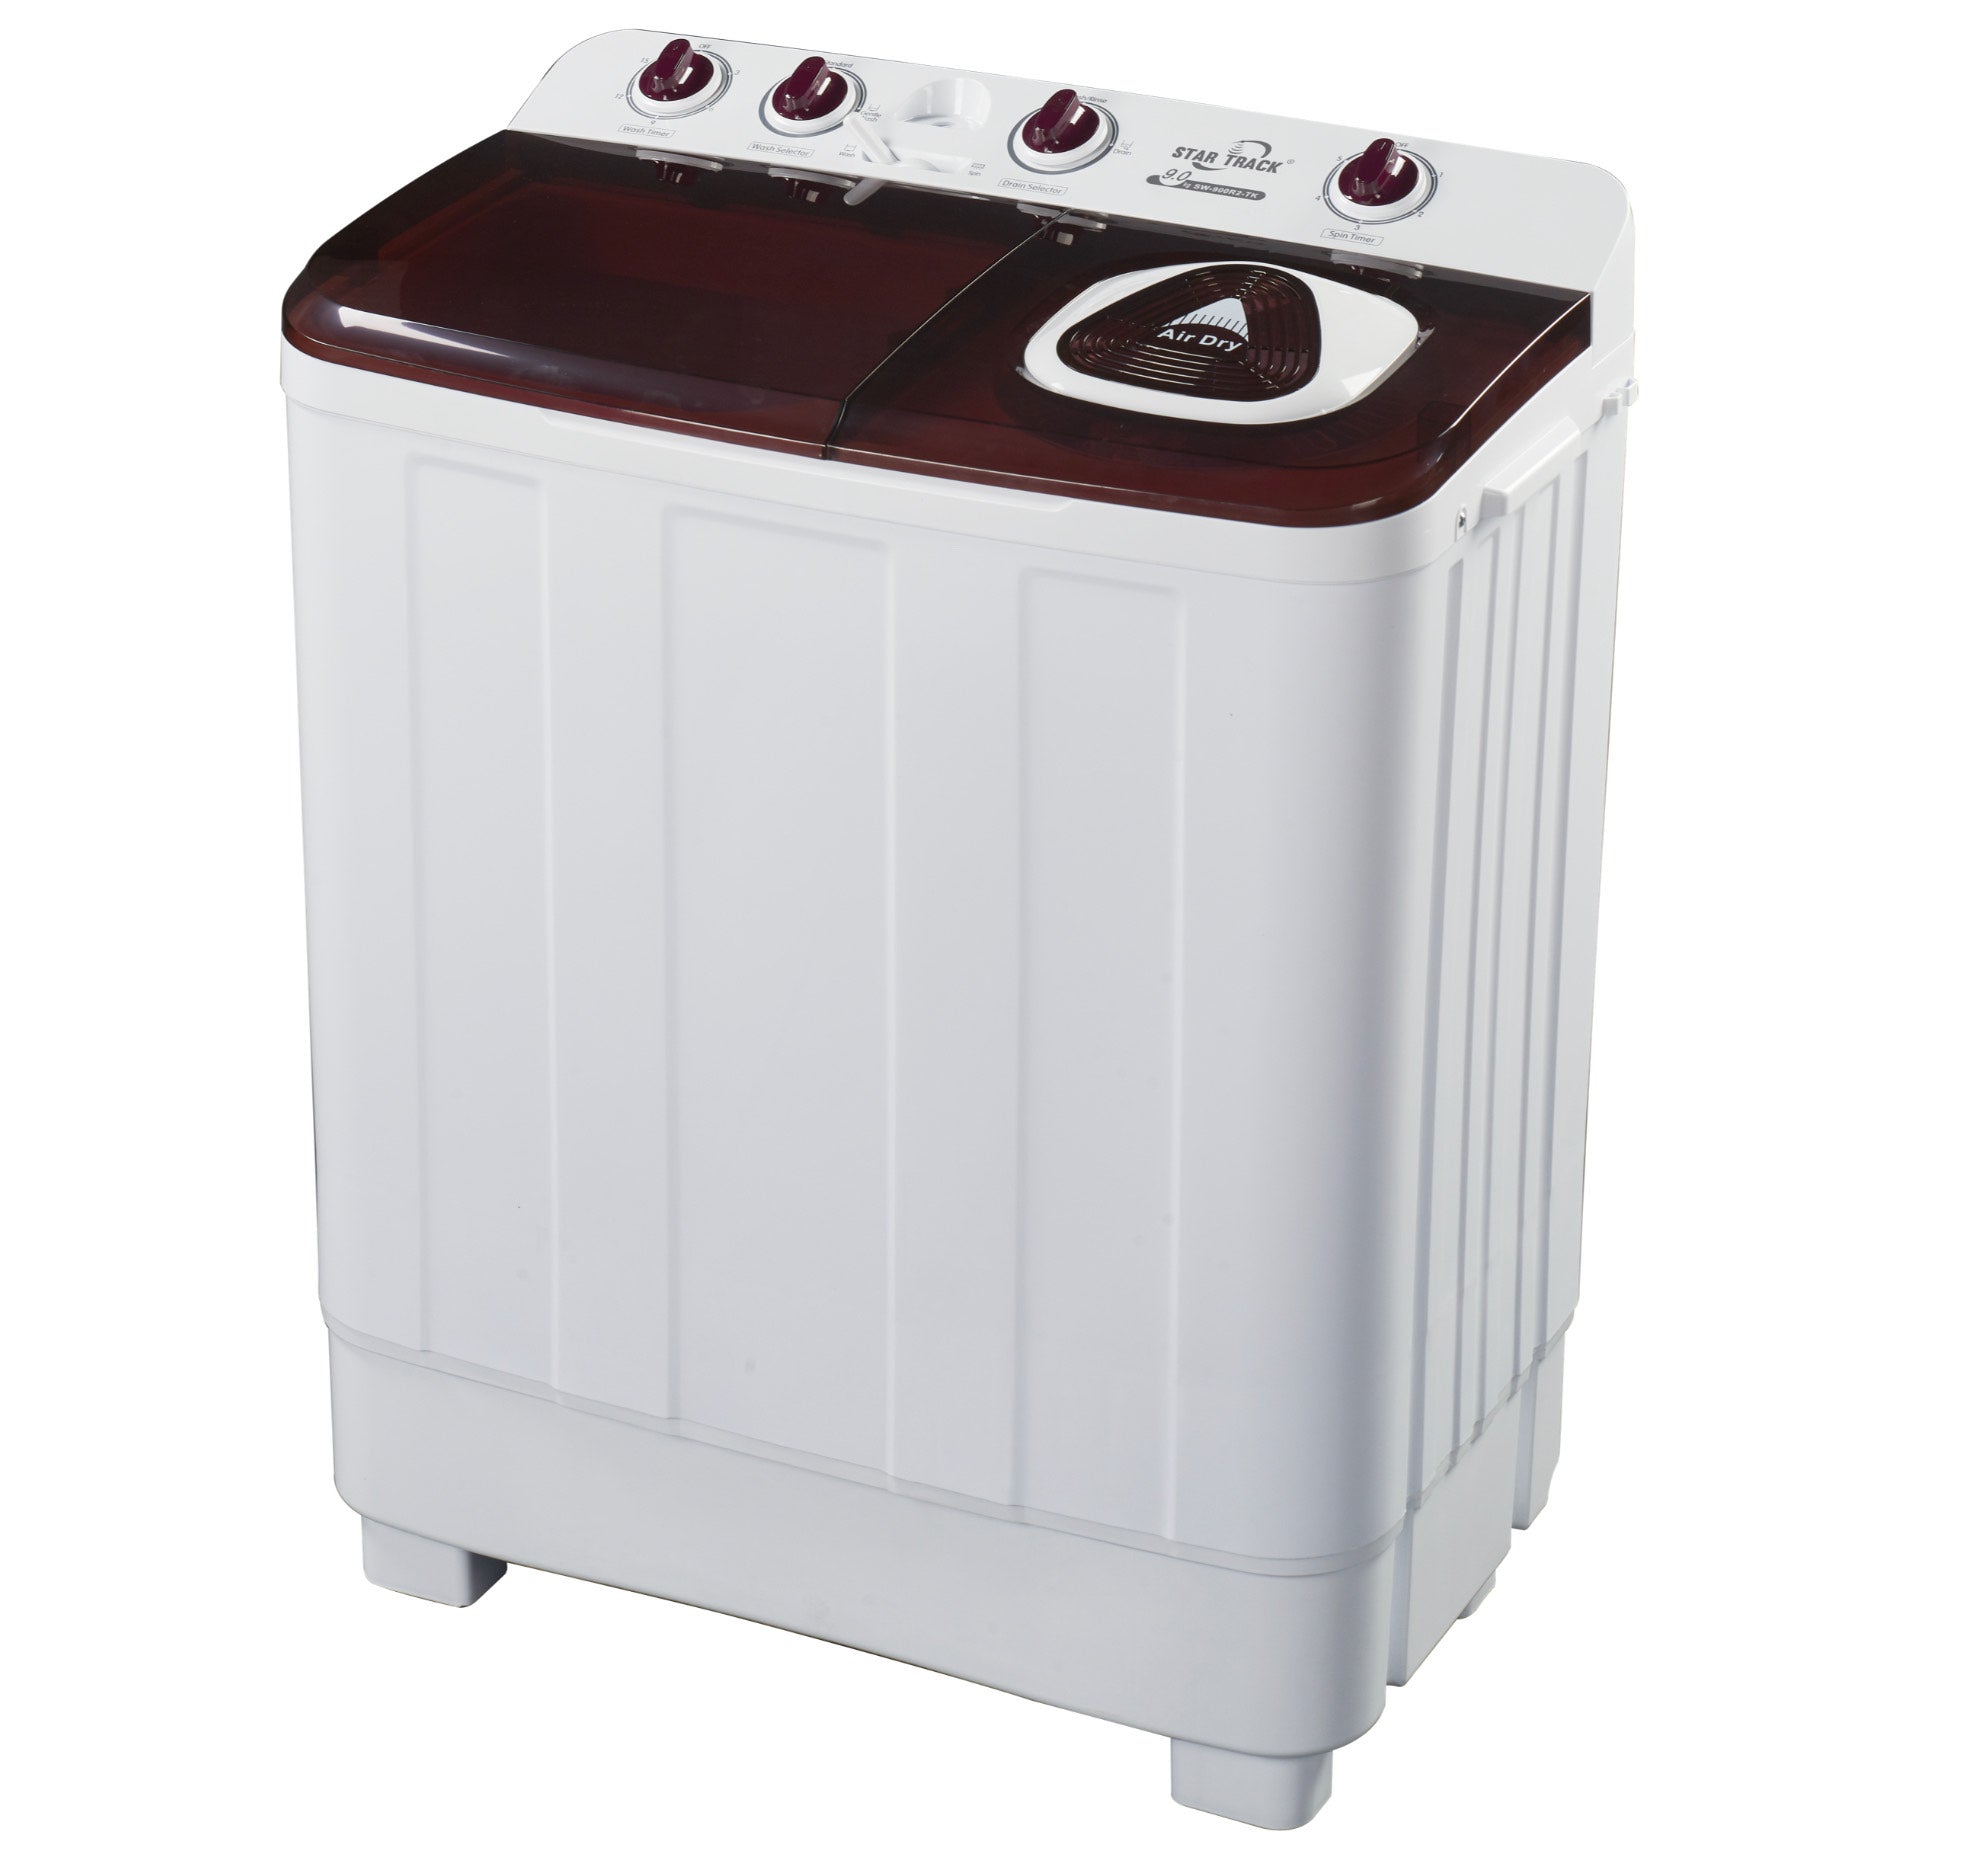 Star Track Twin-tub Semi-Automatic Washing Machine, Top-Load Washer with Lint Filter  Spin-Dry